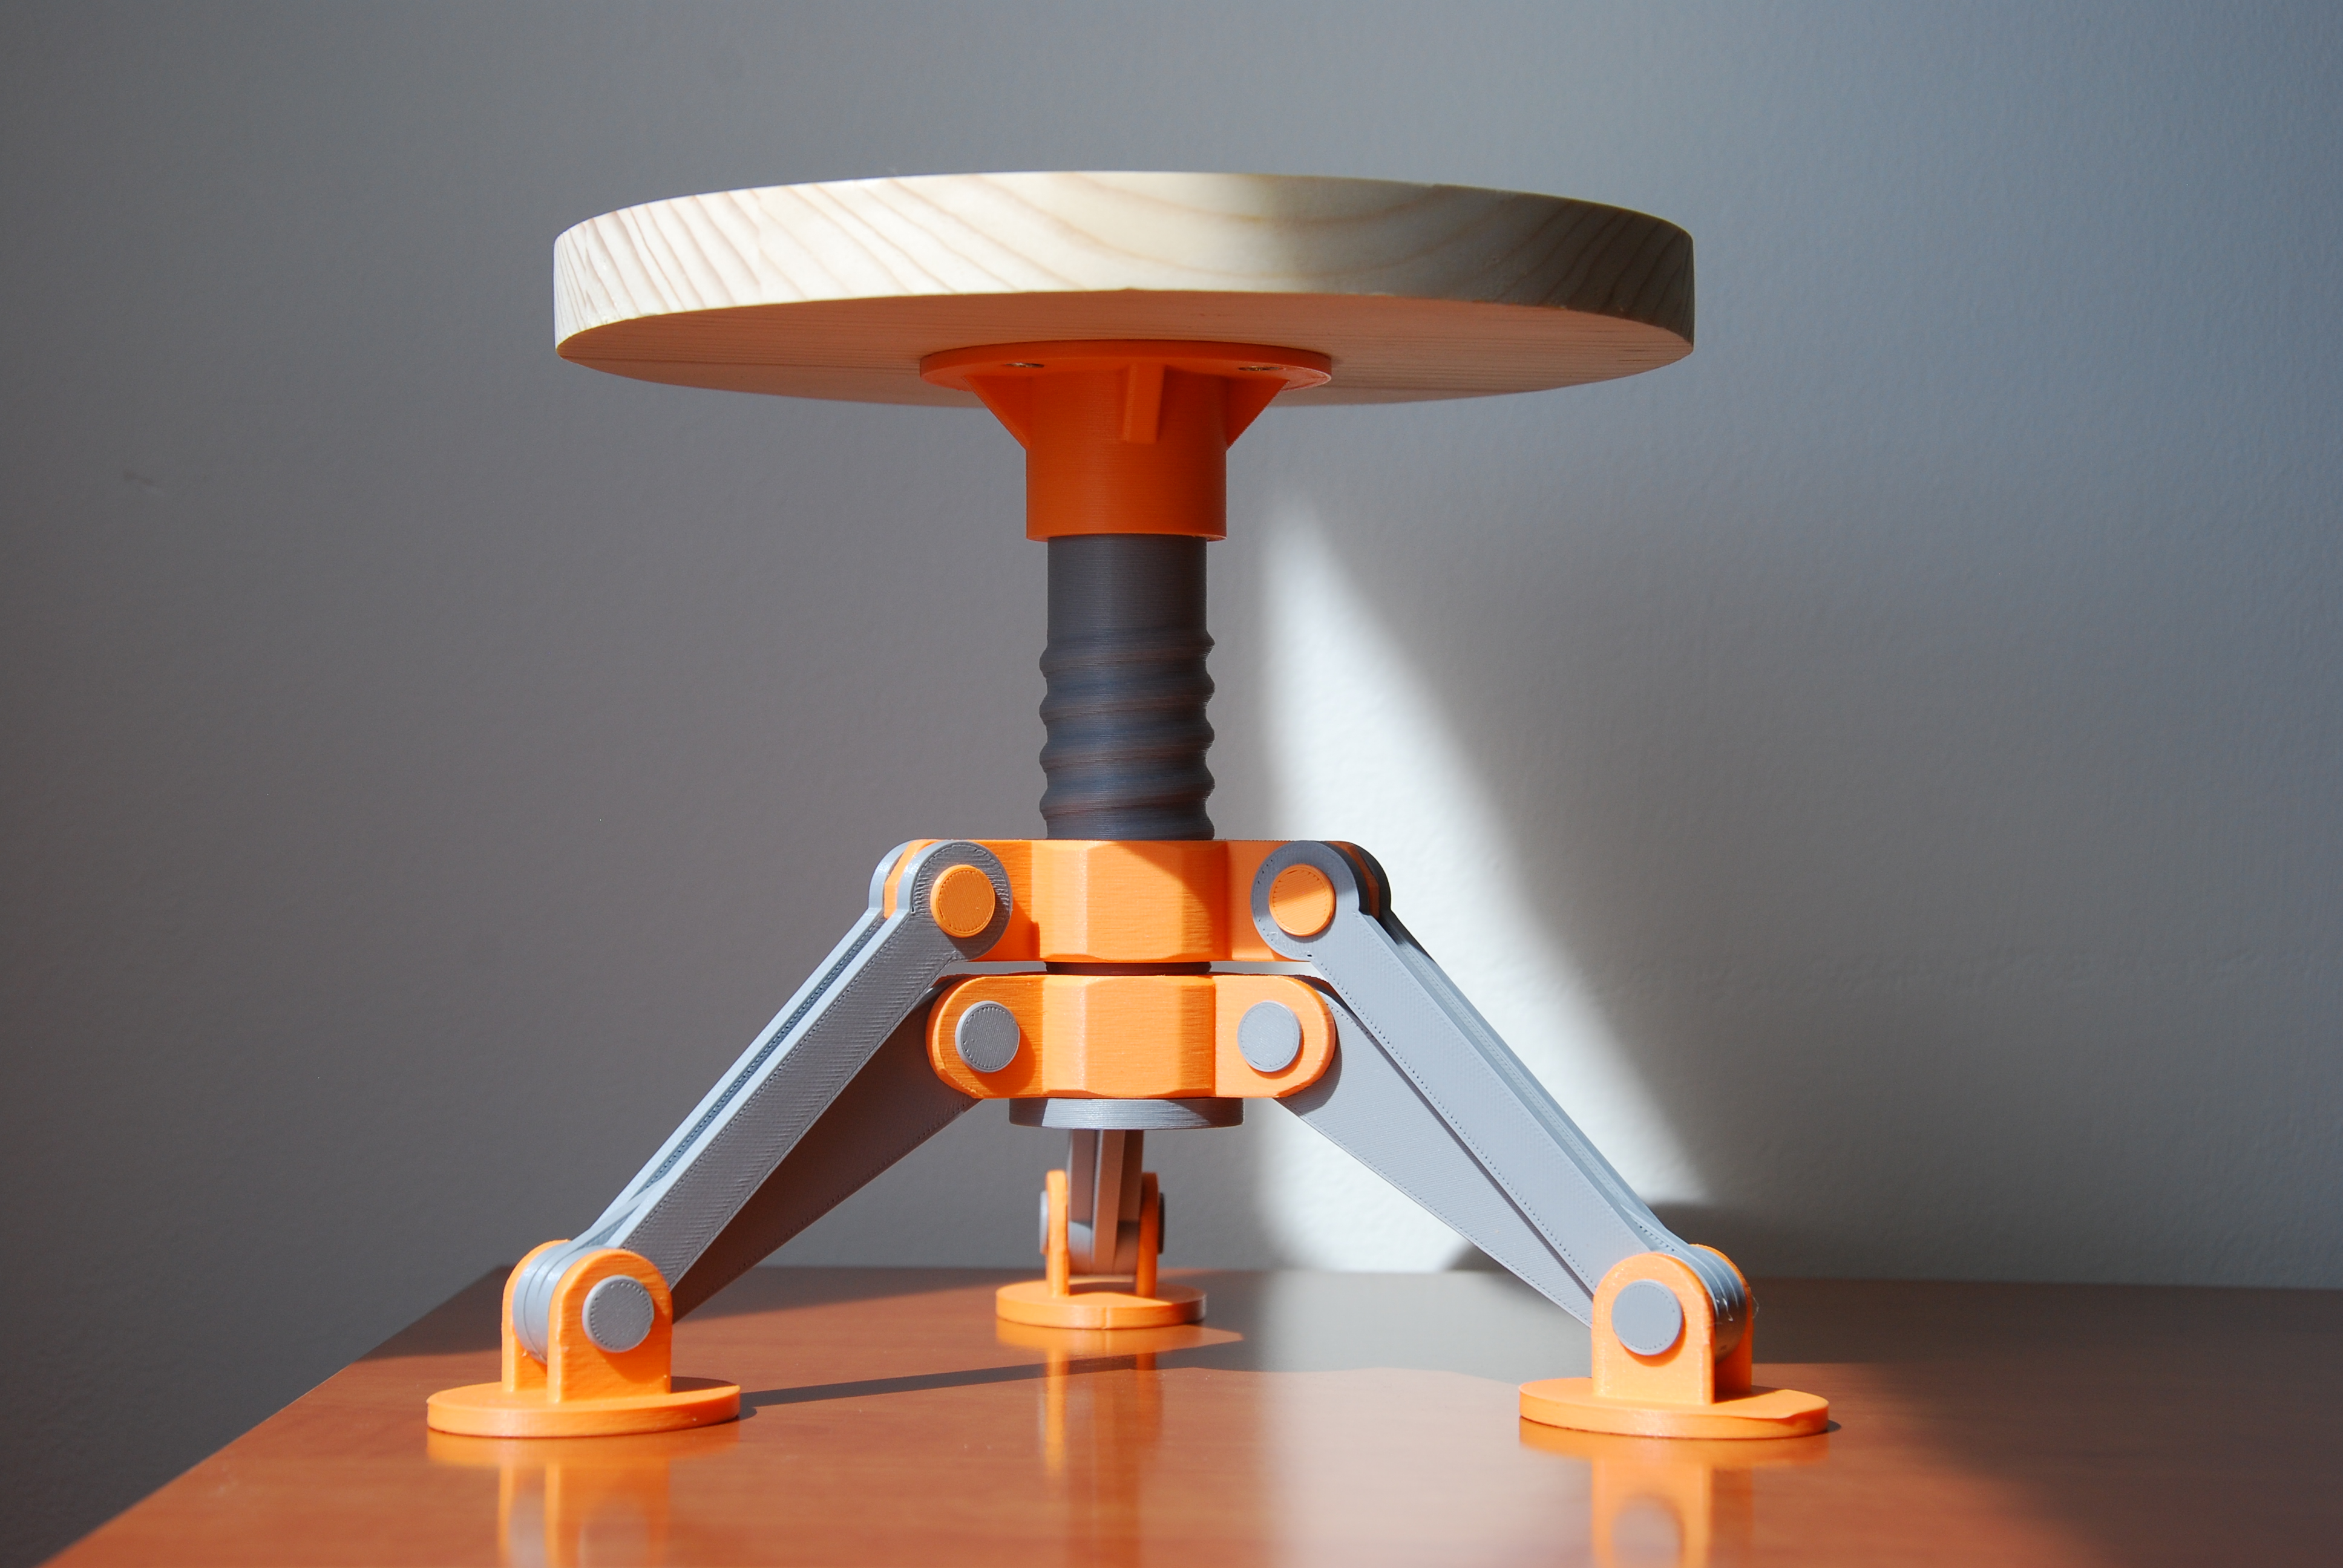 Height-adjustable table or chair